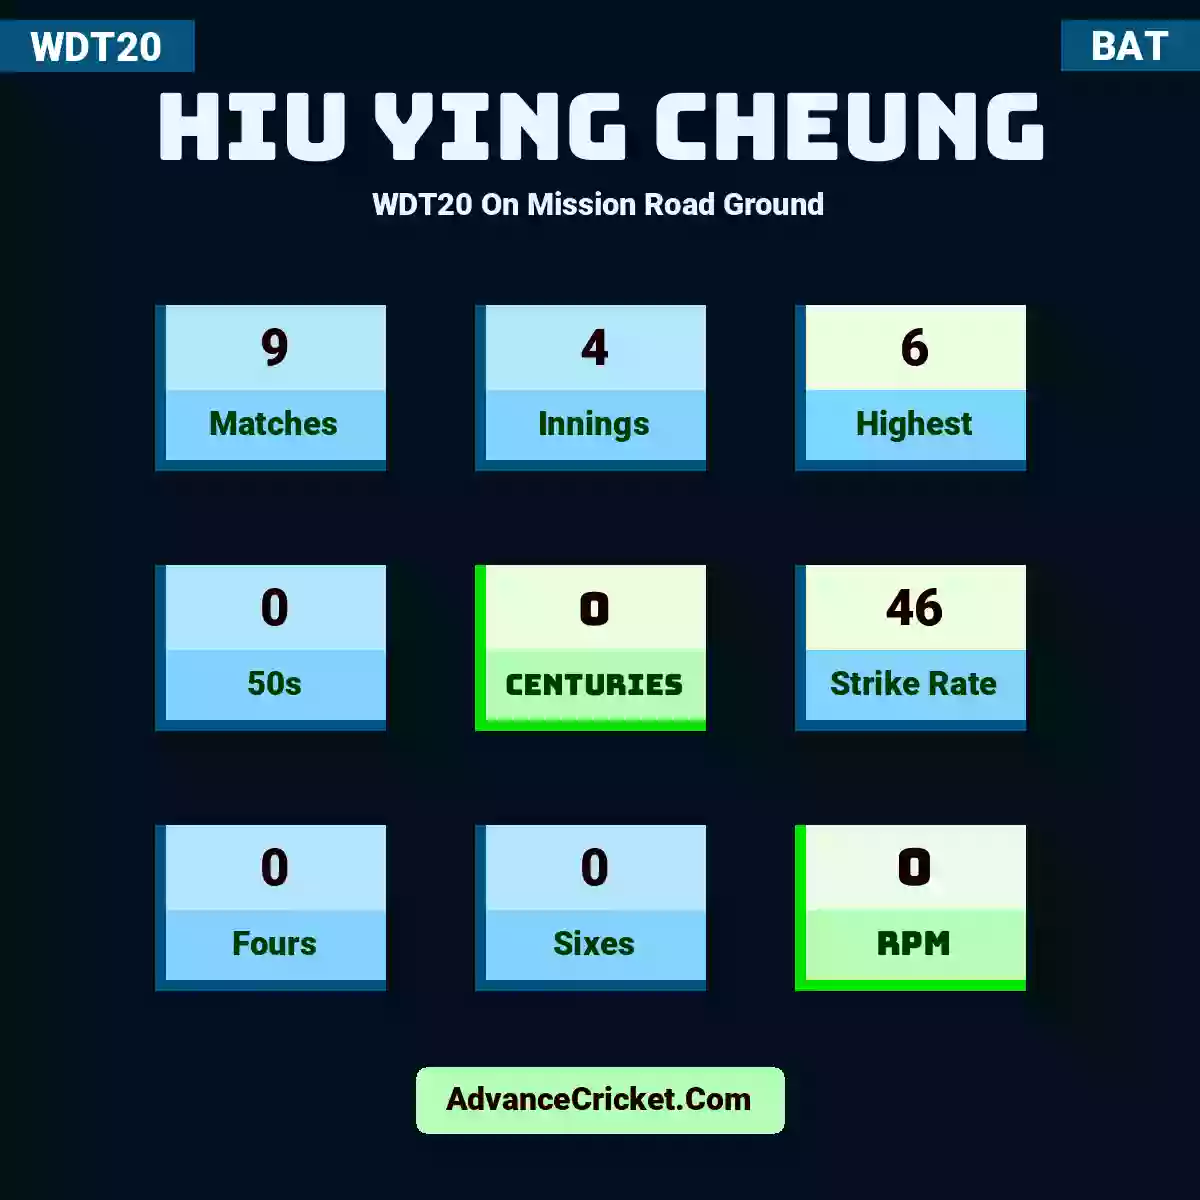 Hiu Ying Cheung WDT20  On Mission Road Ground, Hiu Ying Cheung played 9 matches, scored 6 runs as highest, 0 half-centuries, and 0 centuries, with a strike rate of 46. H.Ying Cheung hit 0 fours and 0 sixes, with an RPM of 0.